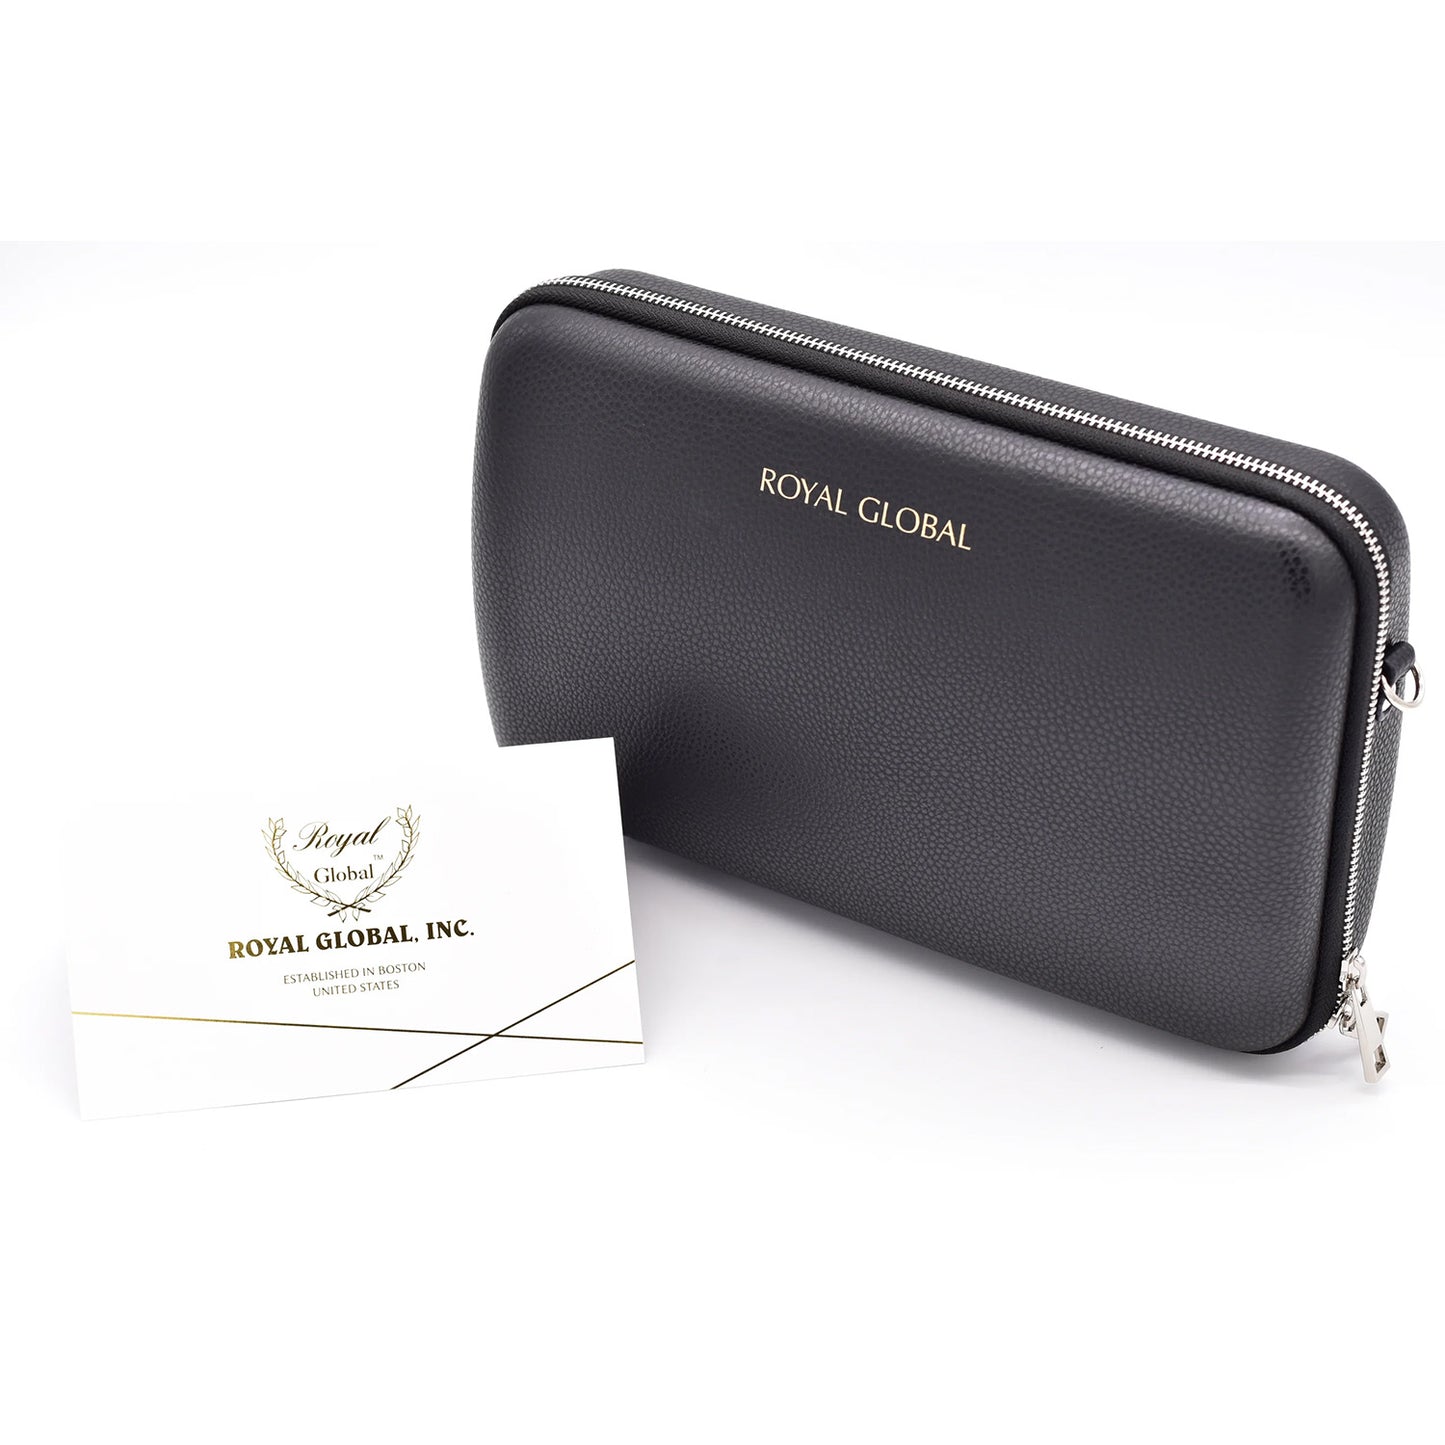 Black Royal Global clarinet case on a white background, with Royal Global brand card in front